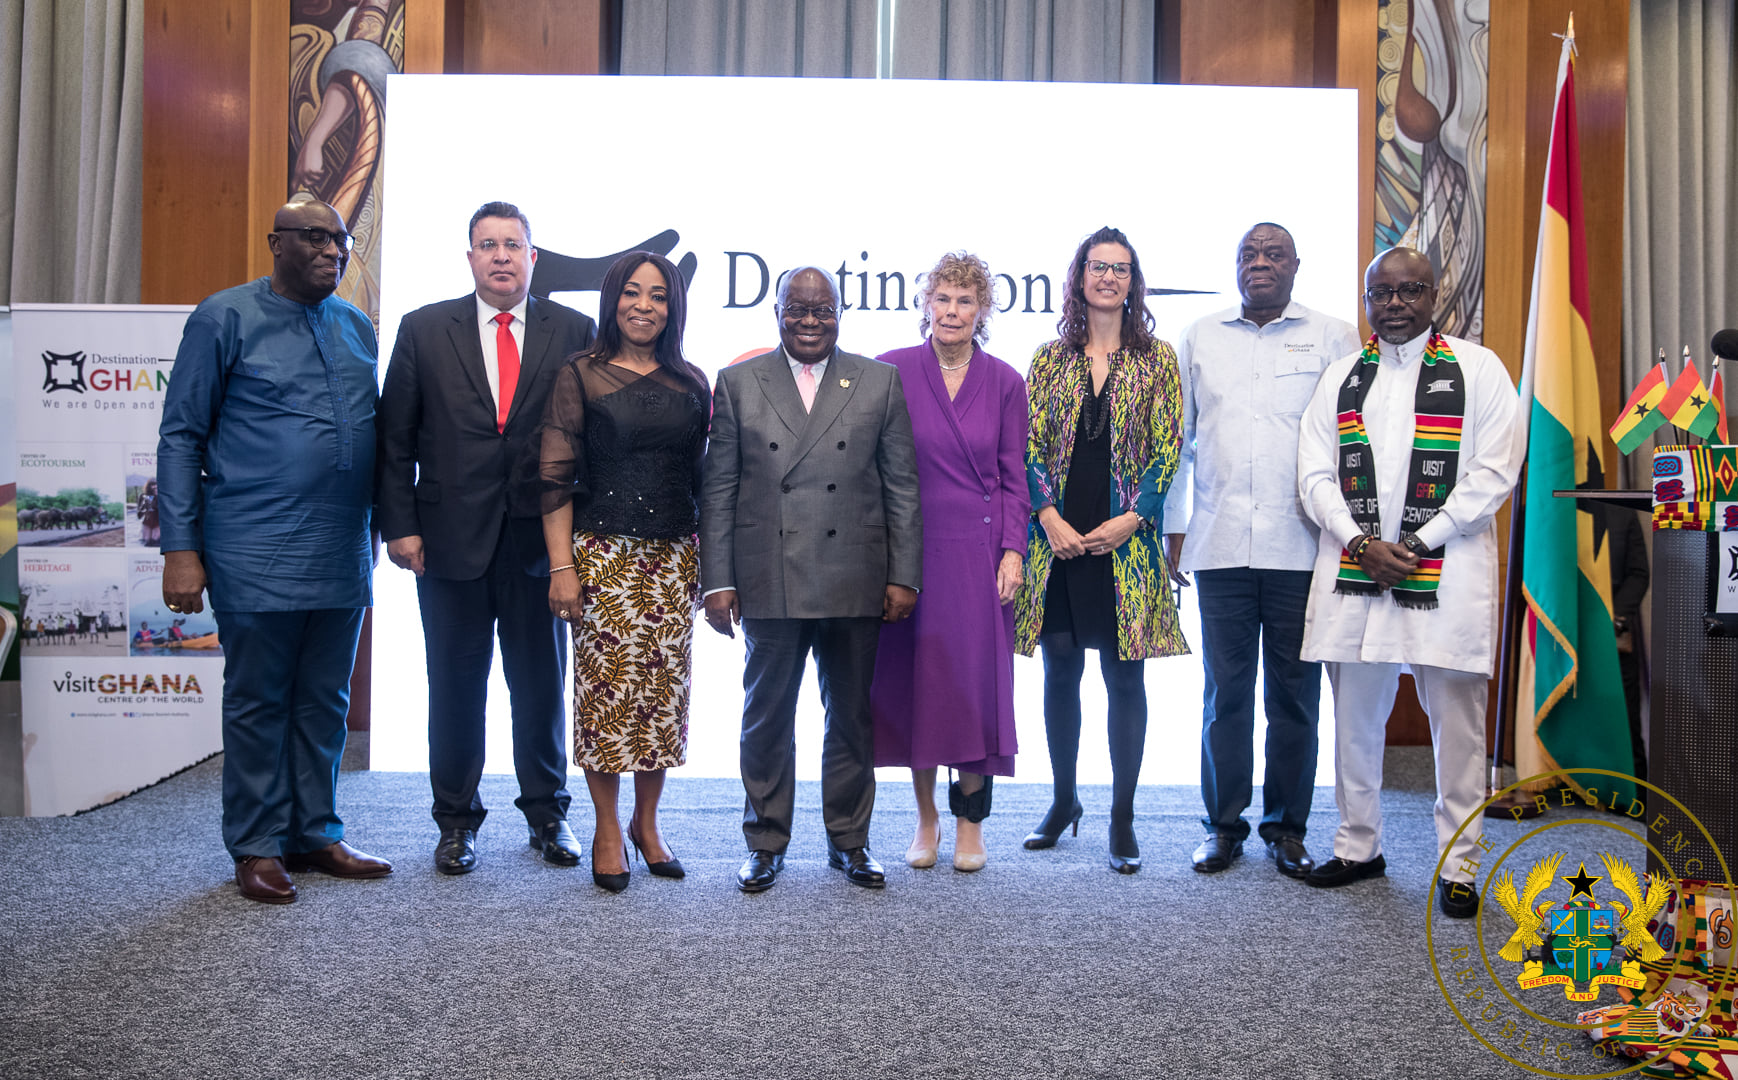 ‘Destination Ghana’ launched to target million tourists from UK, Europe annually 